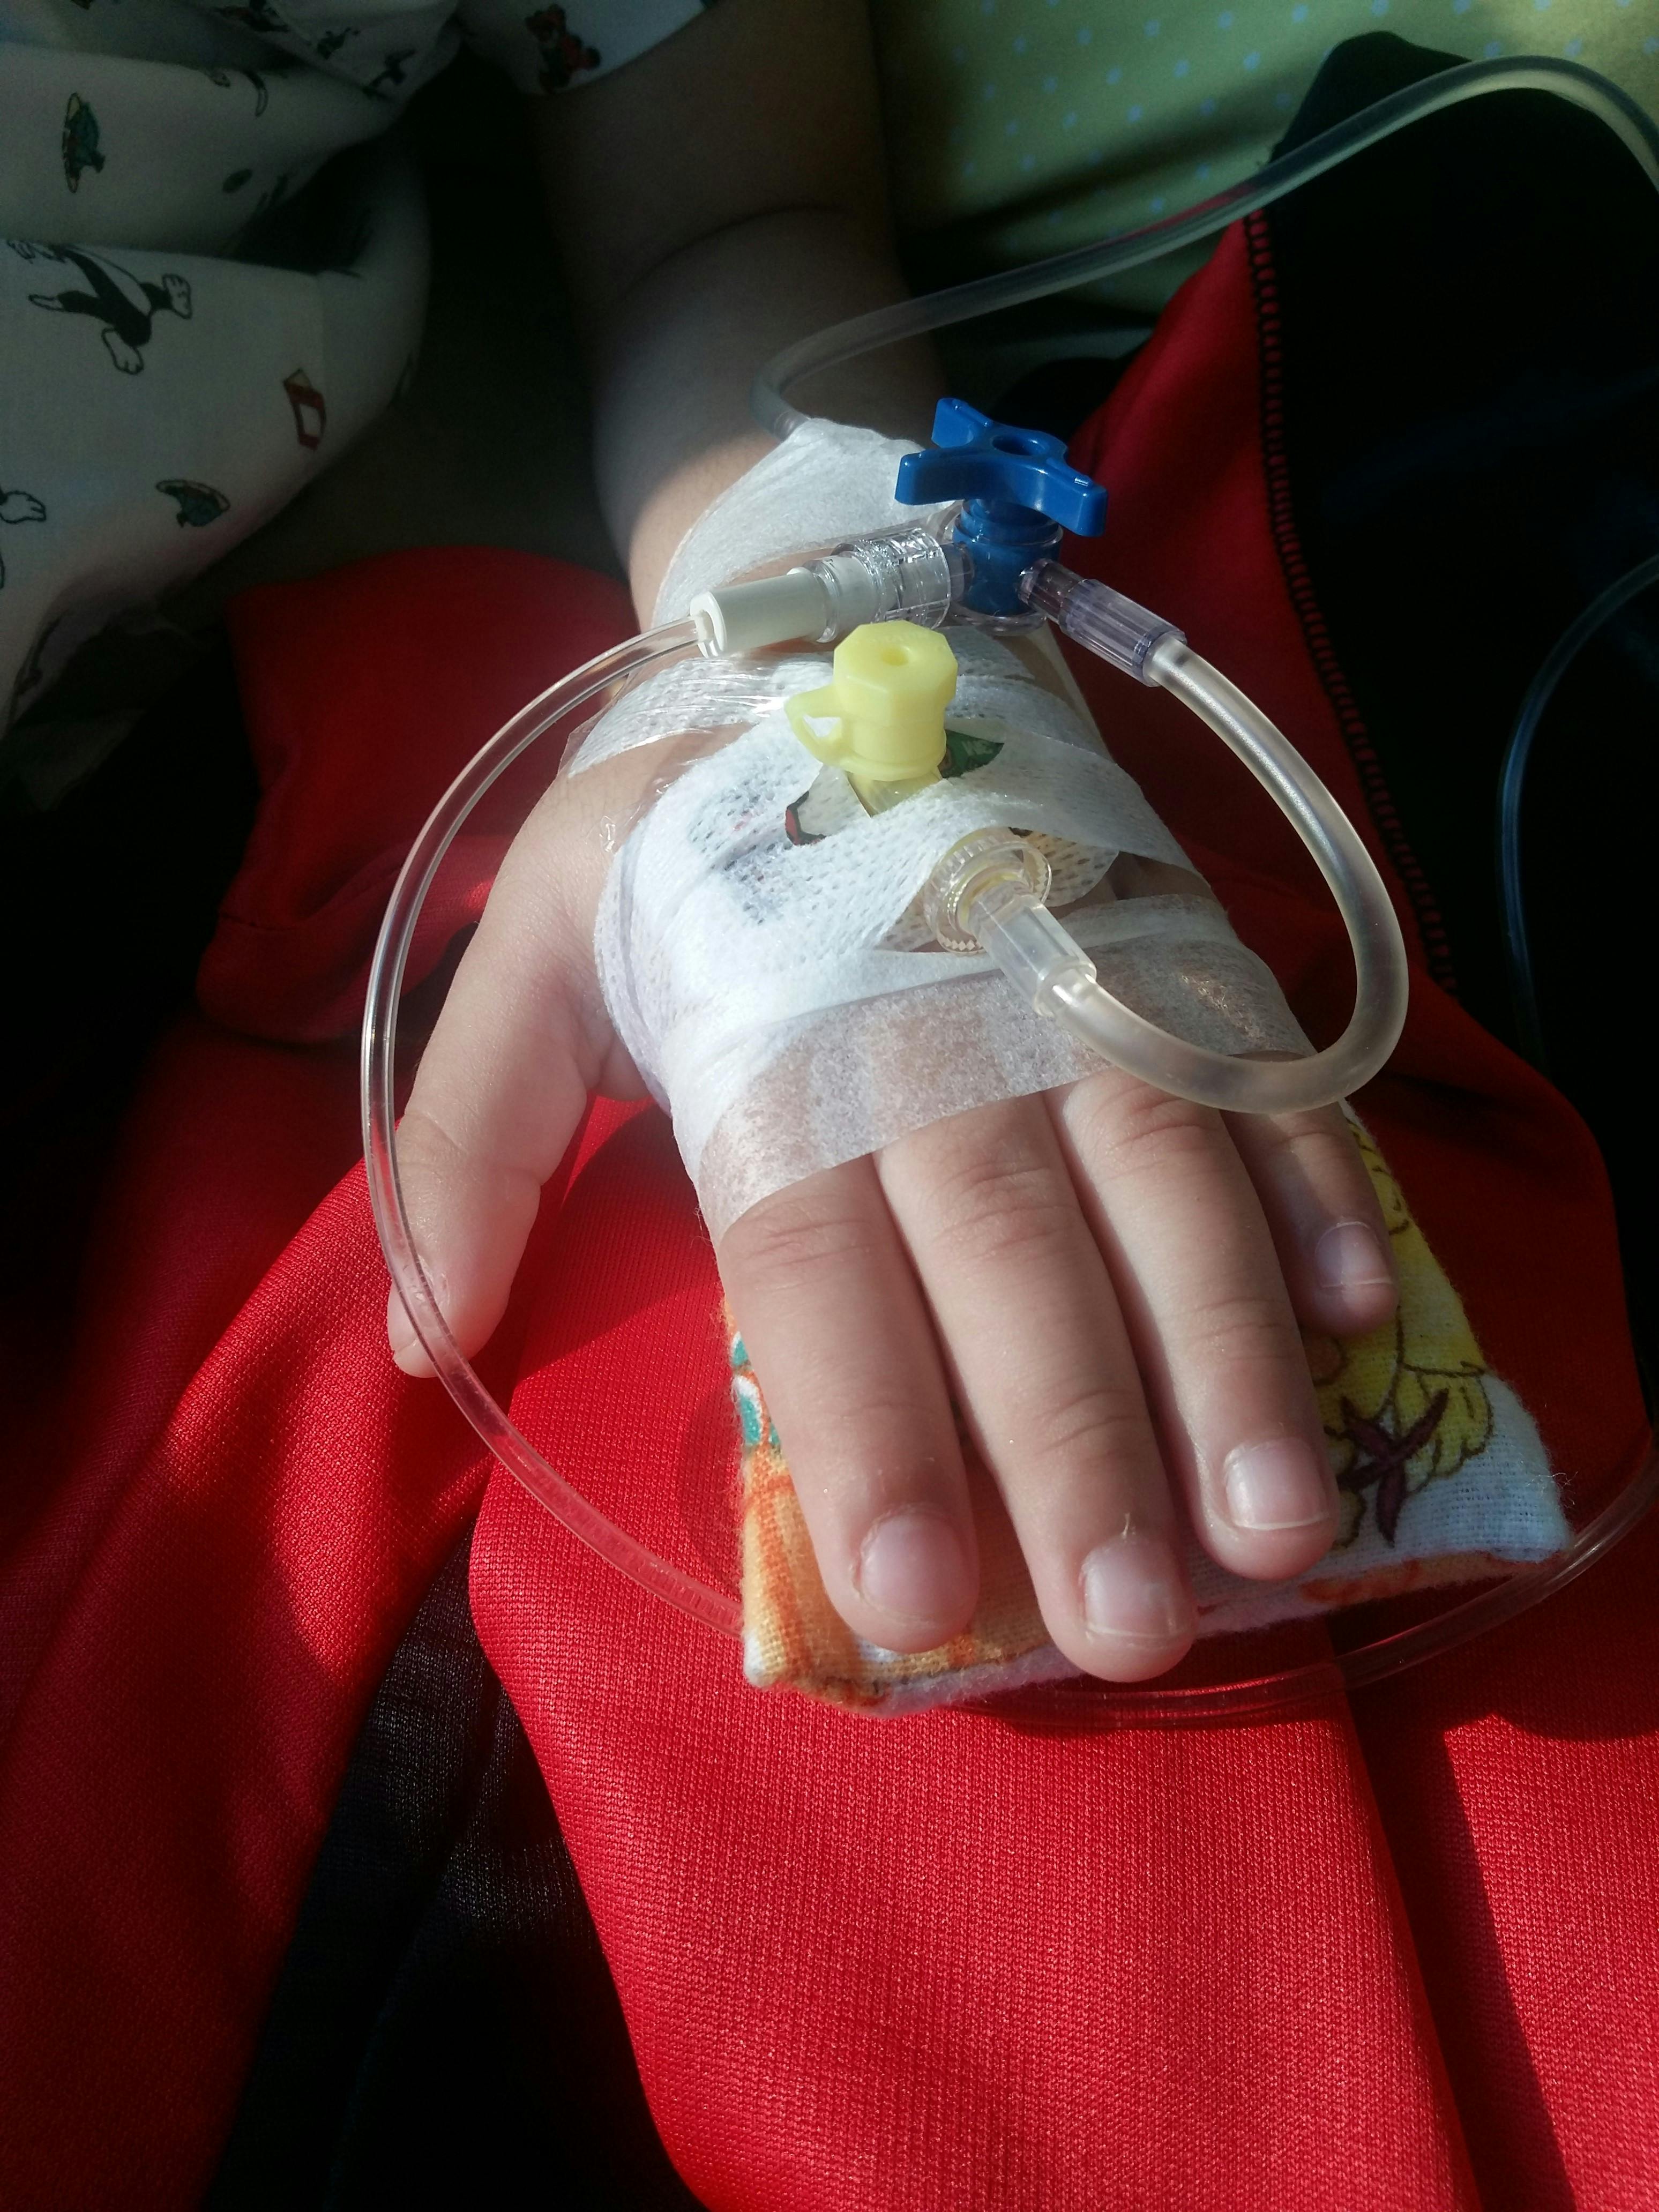 Free stock photo of hand, hospital, infusion